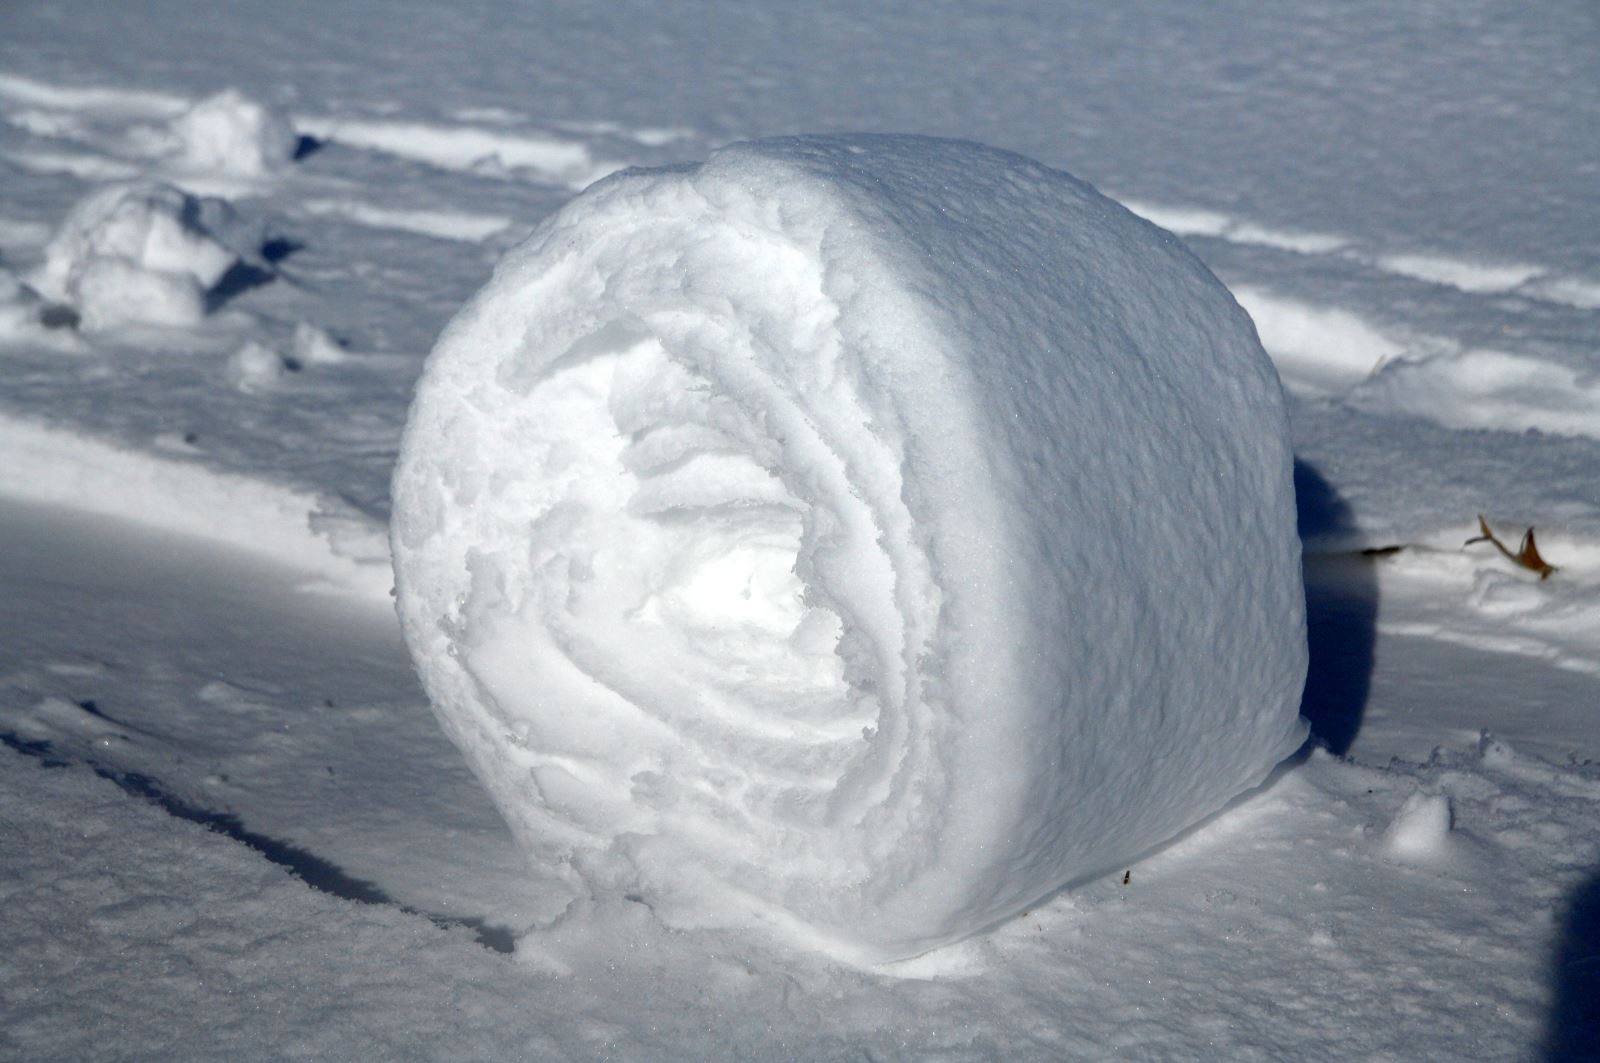 Snow rollers